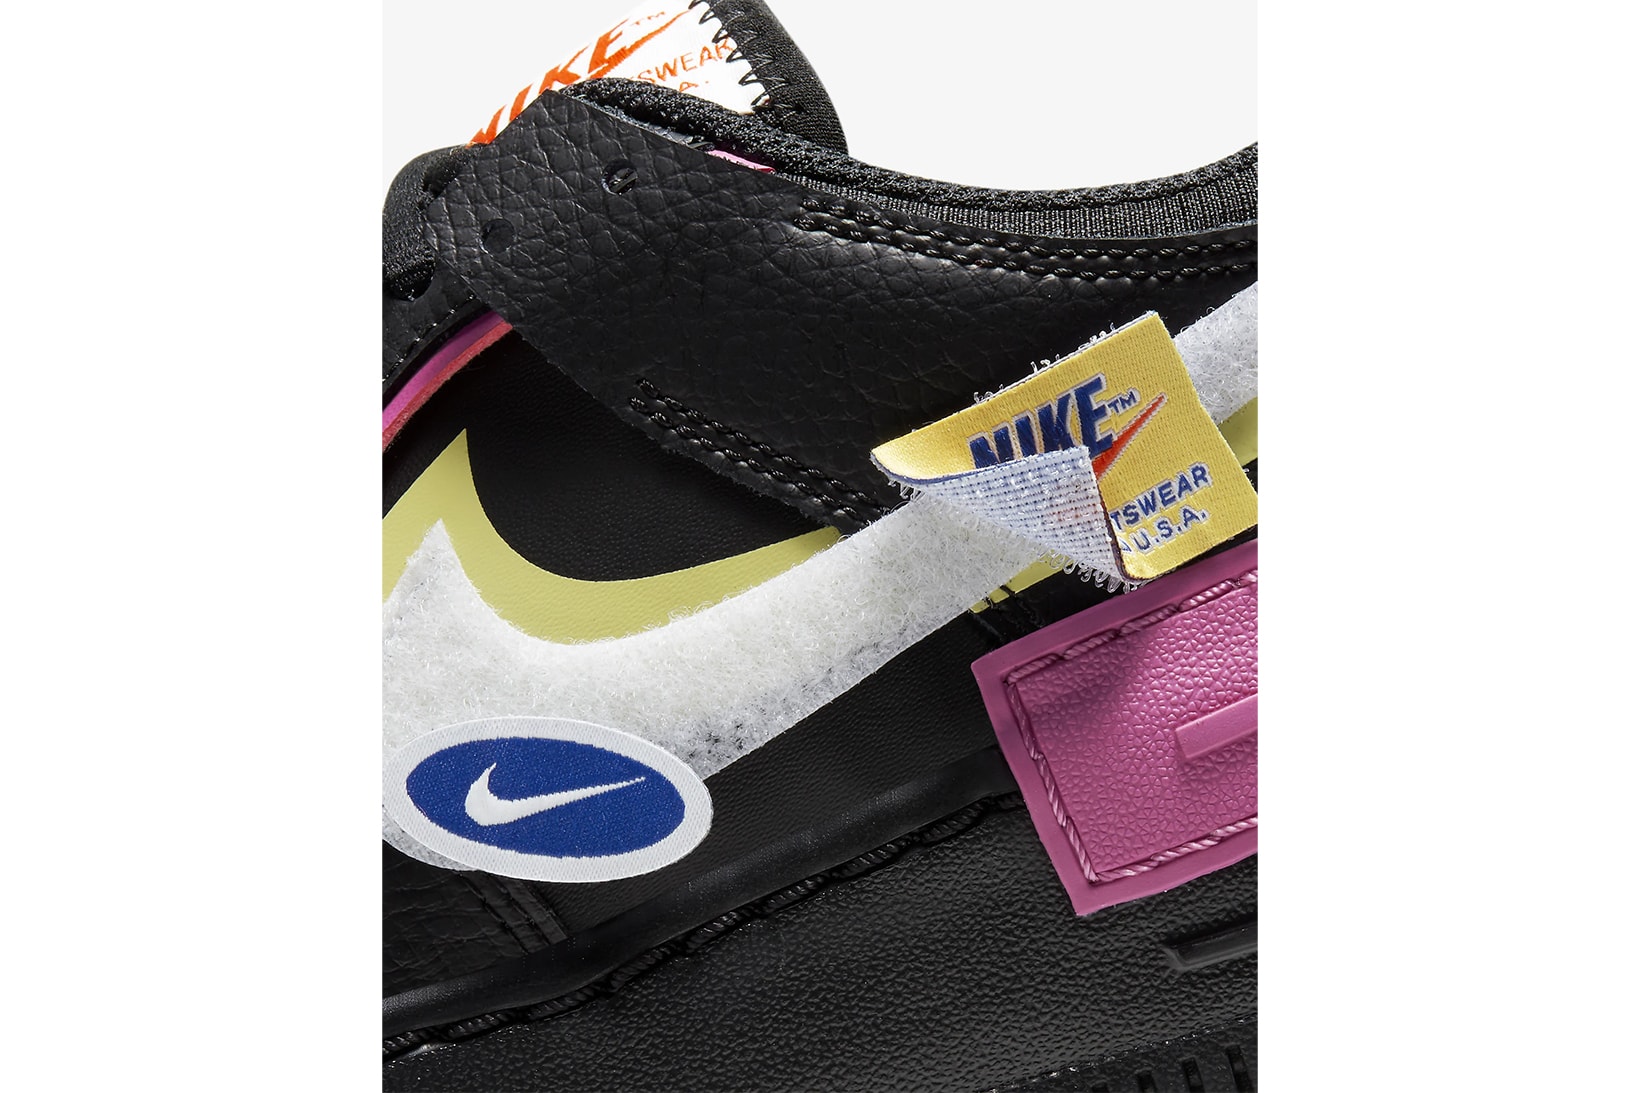 nike air force 1 shadow womens sneakers black pink fuchsia white yellow removable patches shoes footwear sneakerhead